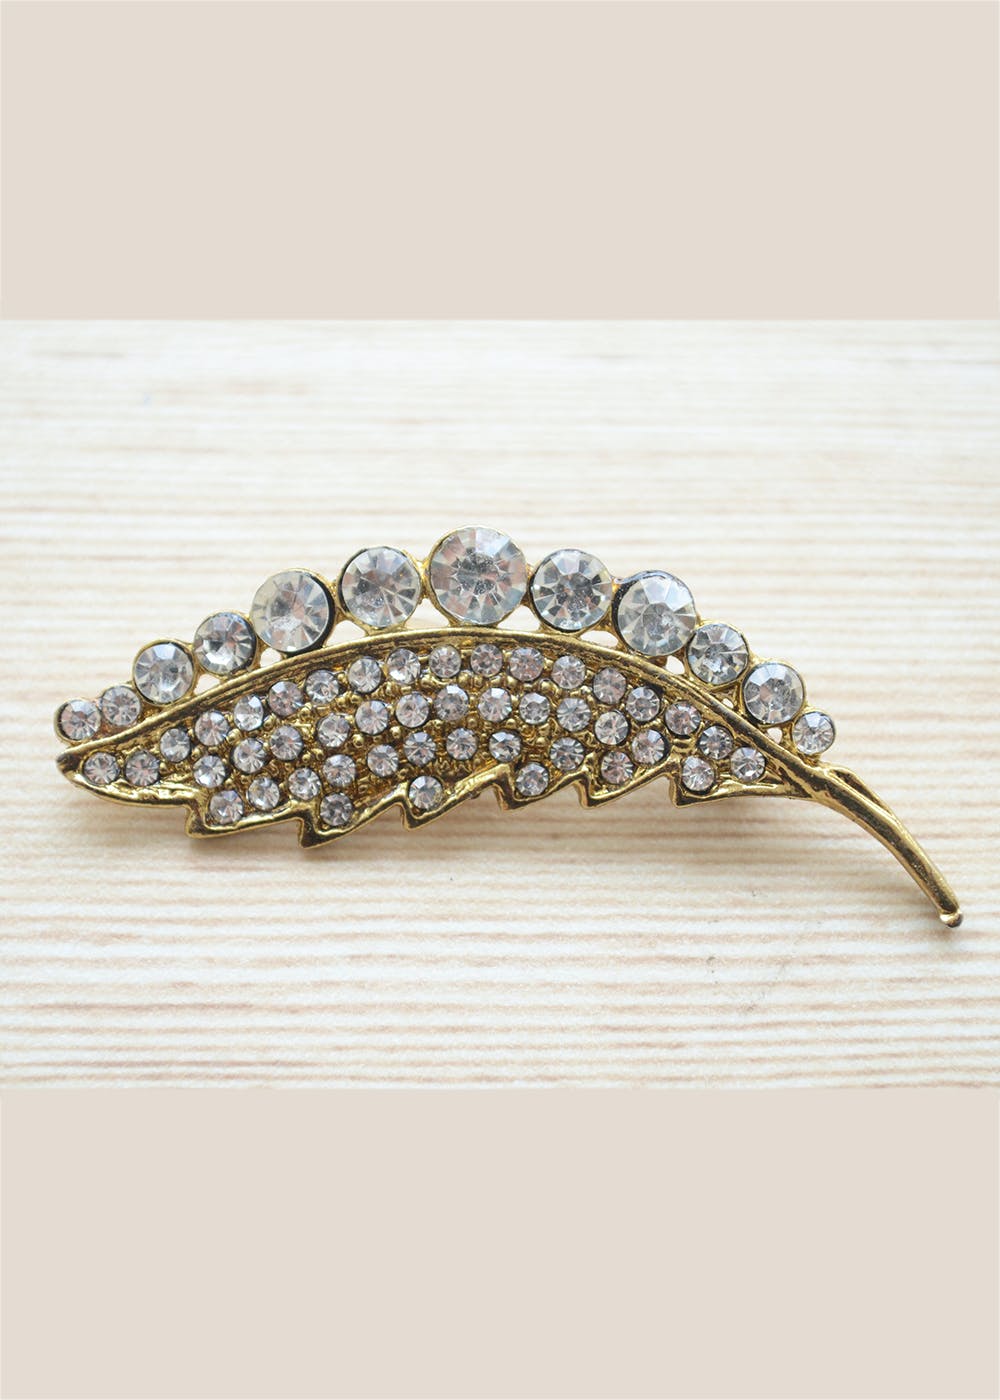 Get Clear Stone Studded Gold Feather Brooch at ₹ 899 | LBB Shop